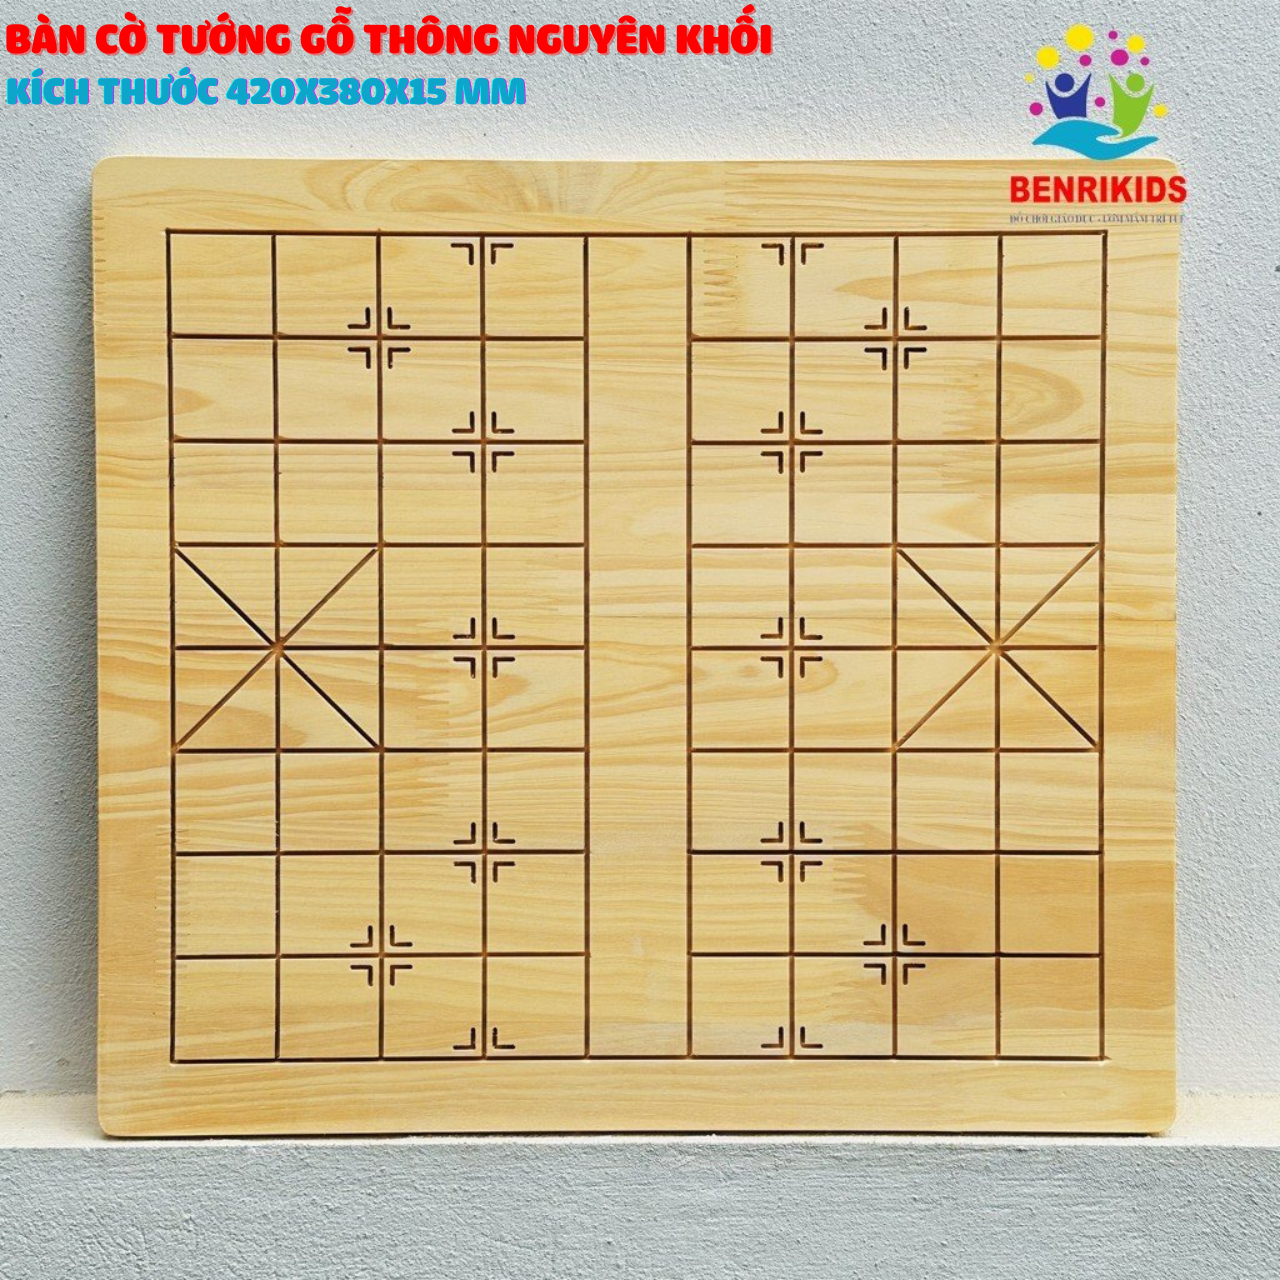 Benrikids new version of pine wood monolithic chess board for all ages